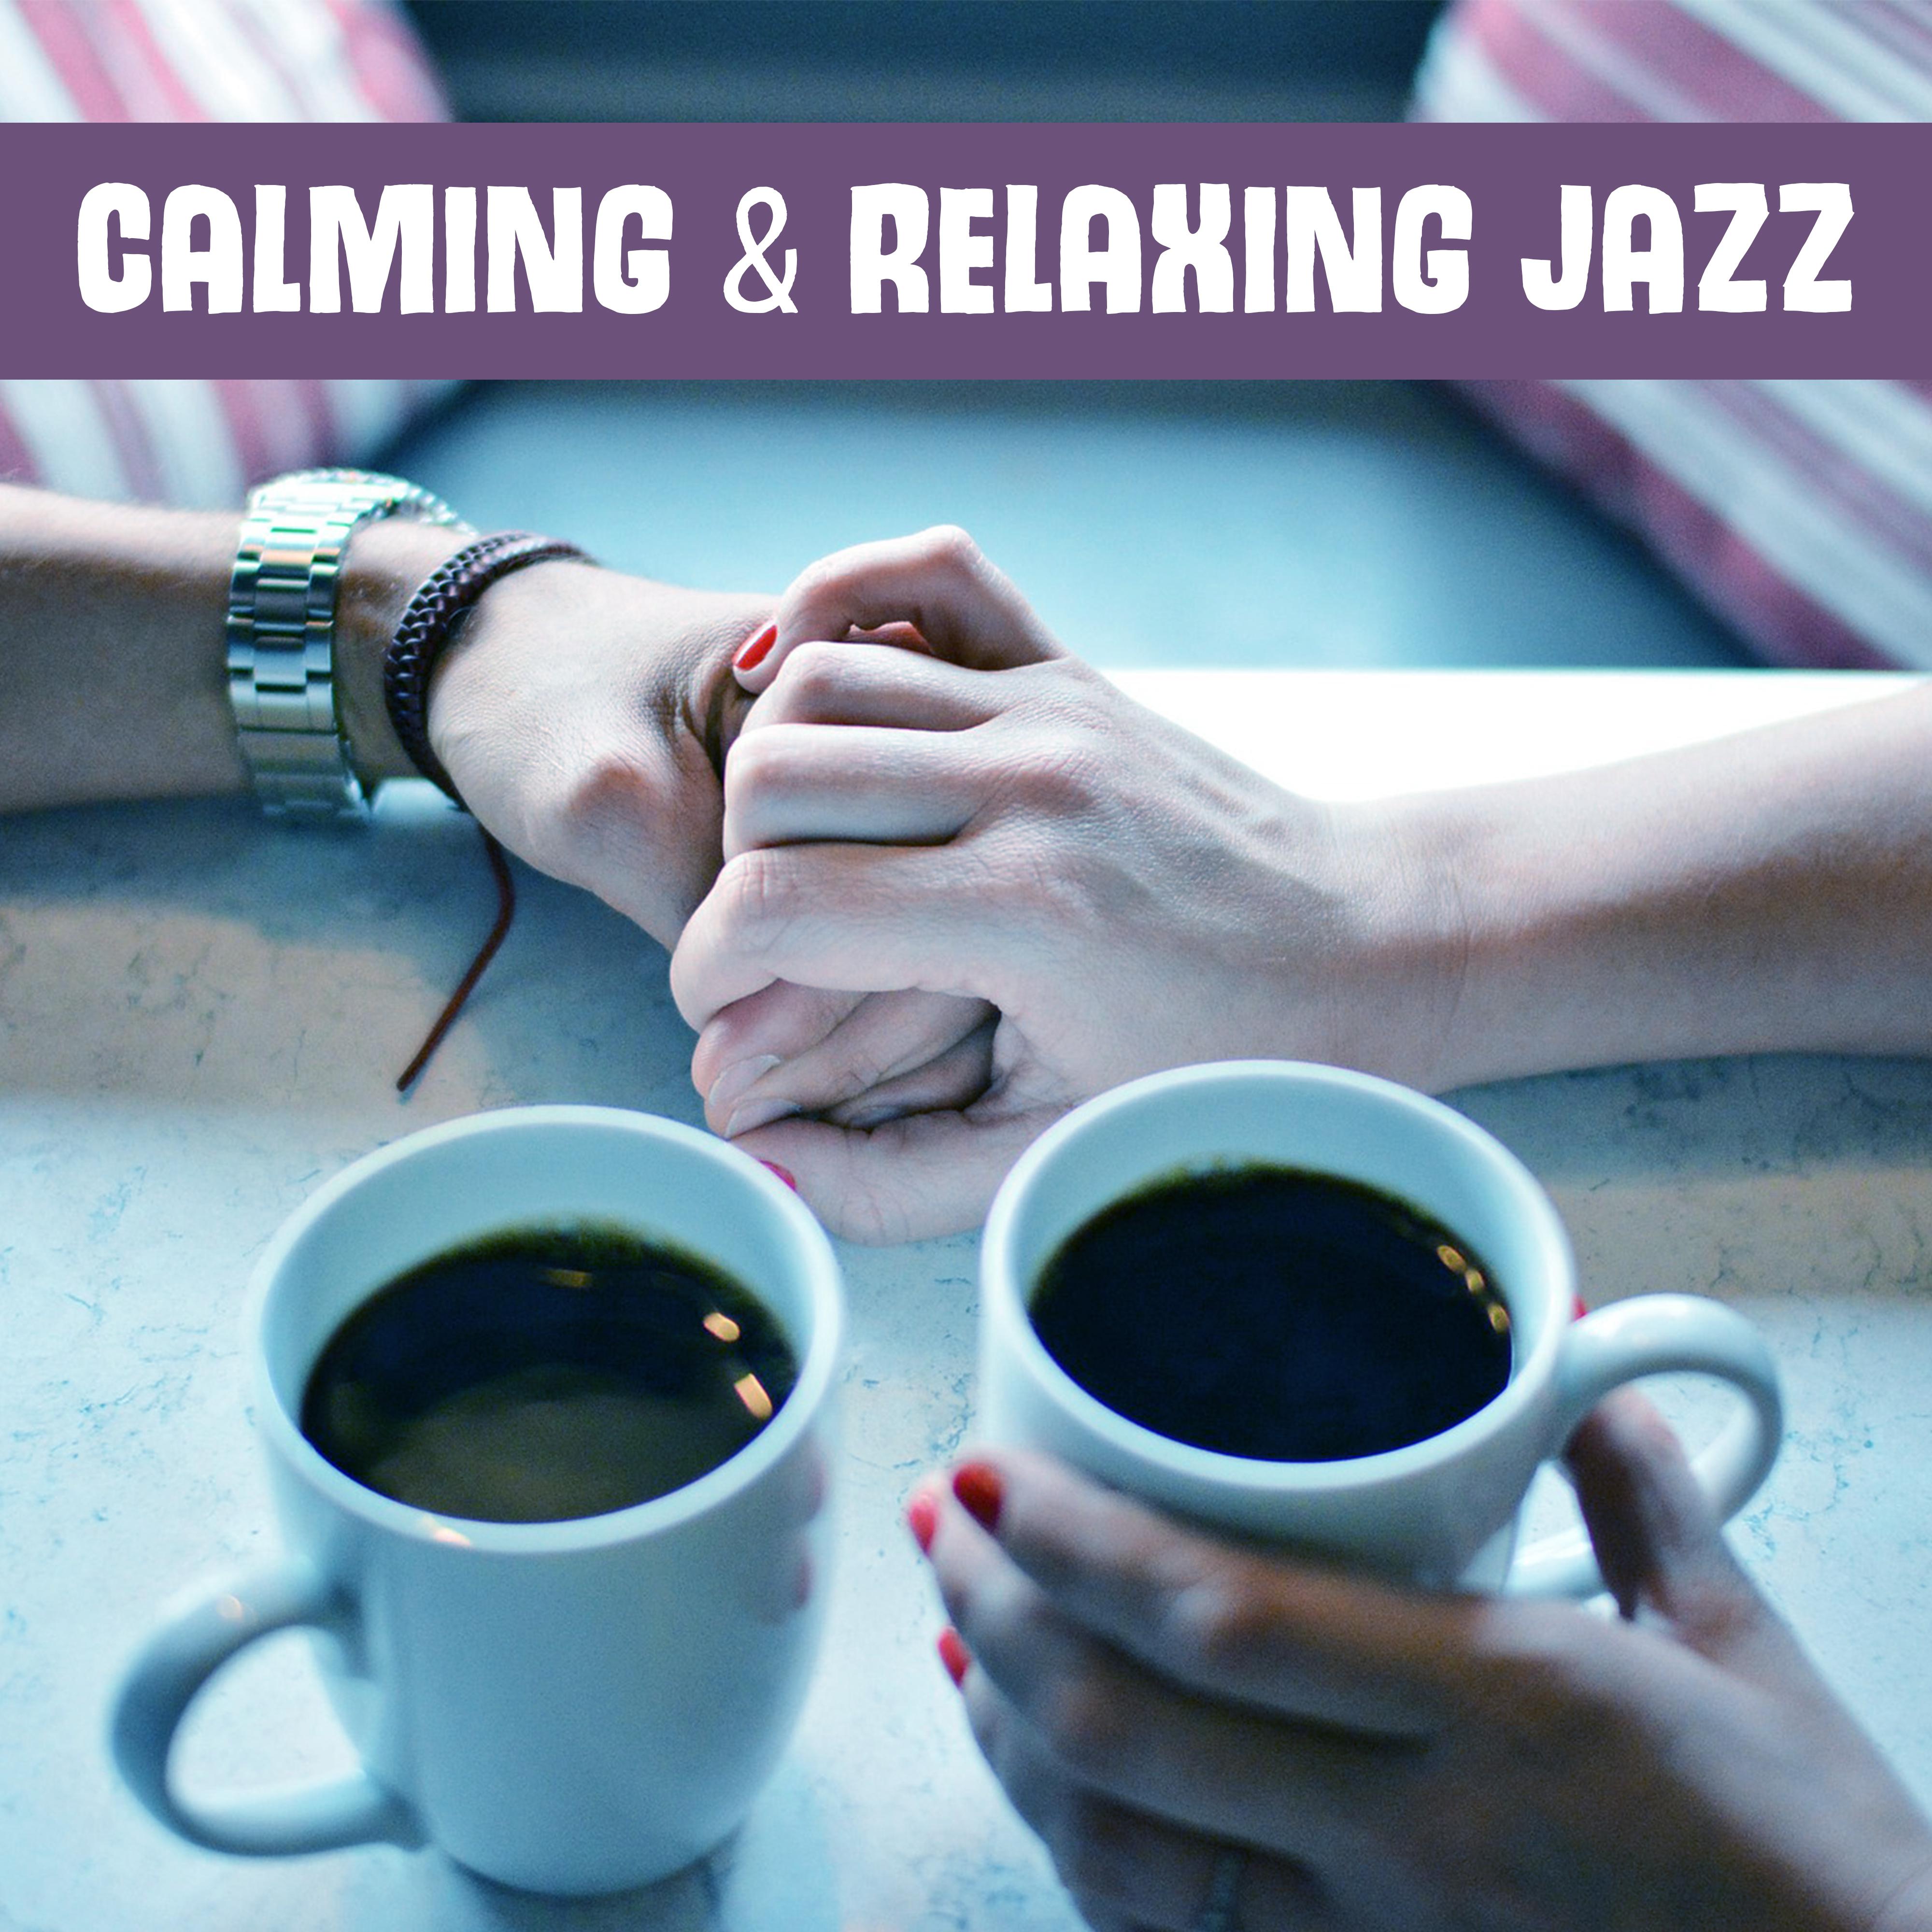 Calming  Relaxing Jazz  Easy Listening, Piano Bar, Smooth Jazz, Chill Yourself